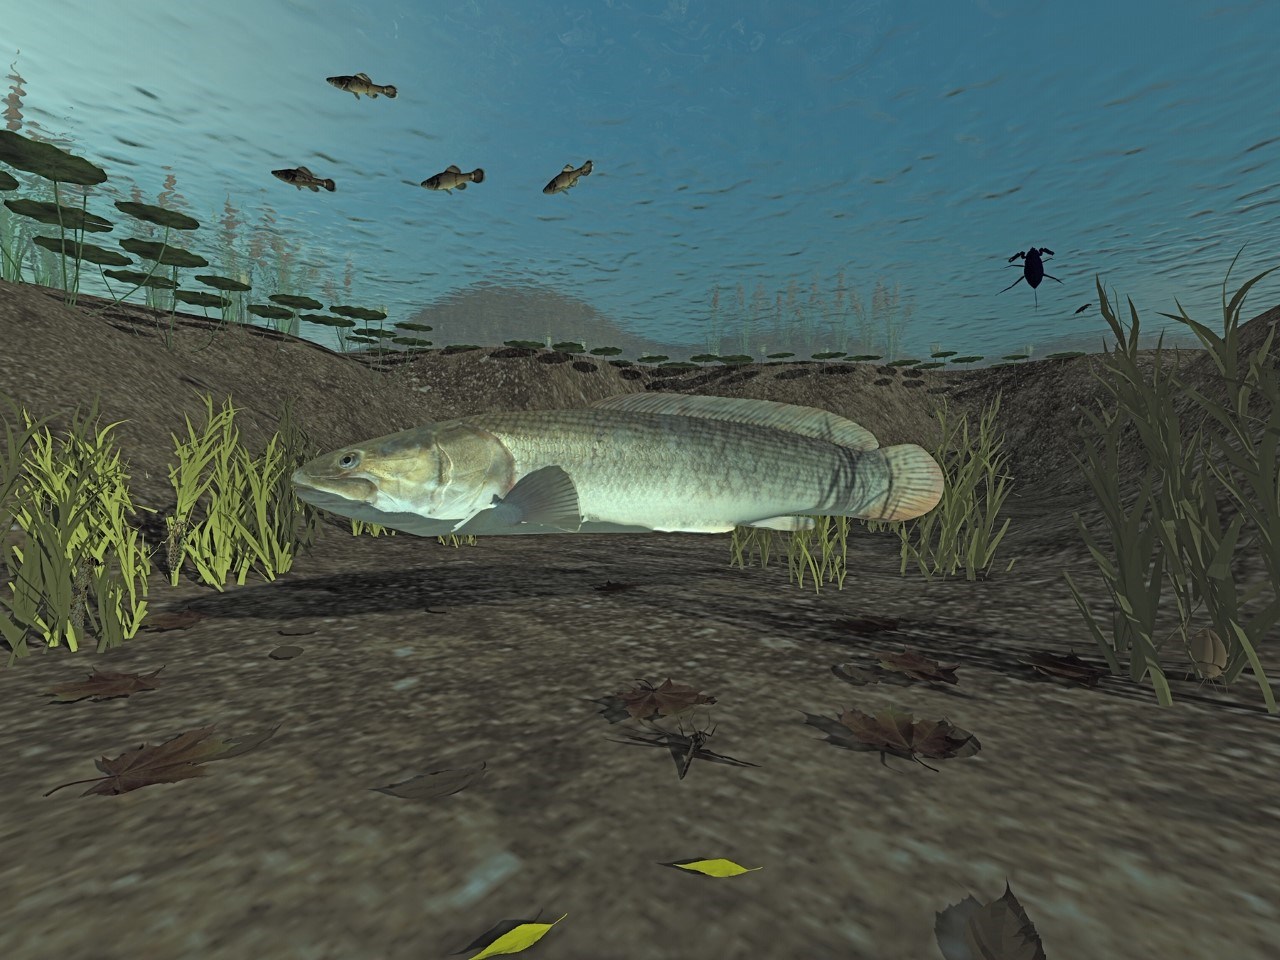 Underwater perspective of the lake looking up to the surface. A large bowfin fish is underwater along with other water plants and smaller fish.